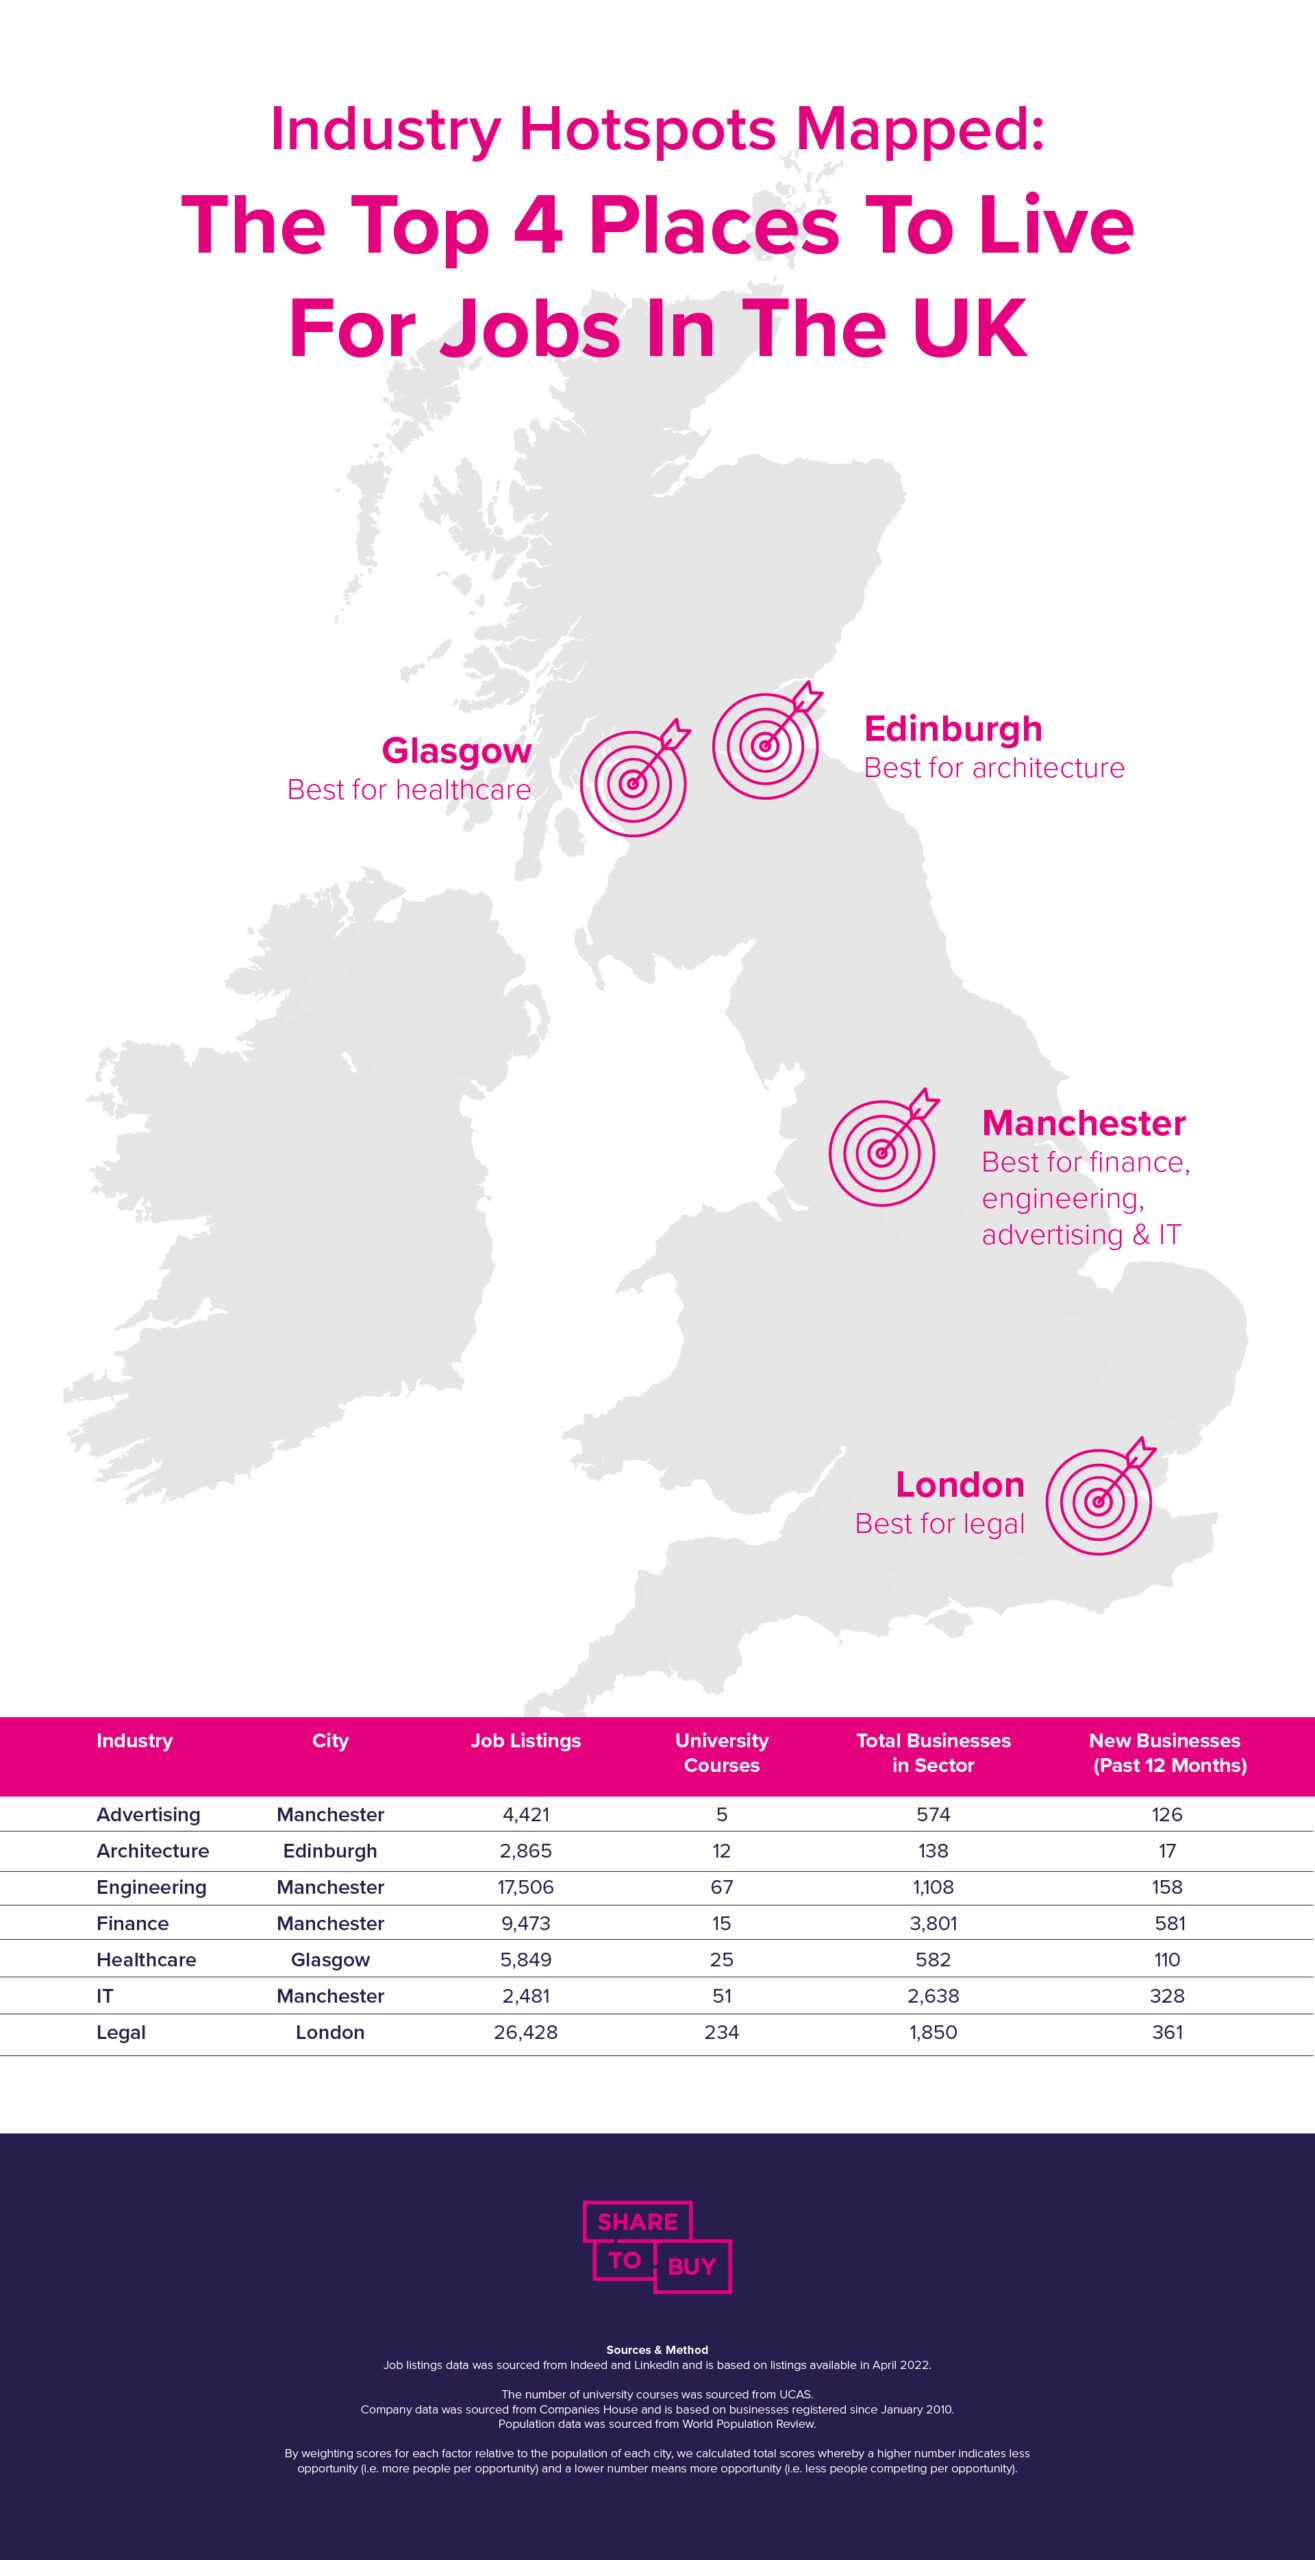 Industry hotspots map showing the best places to live for jobs in the UK.